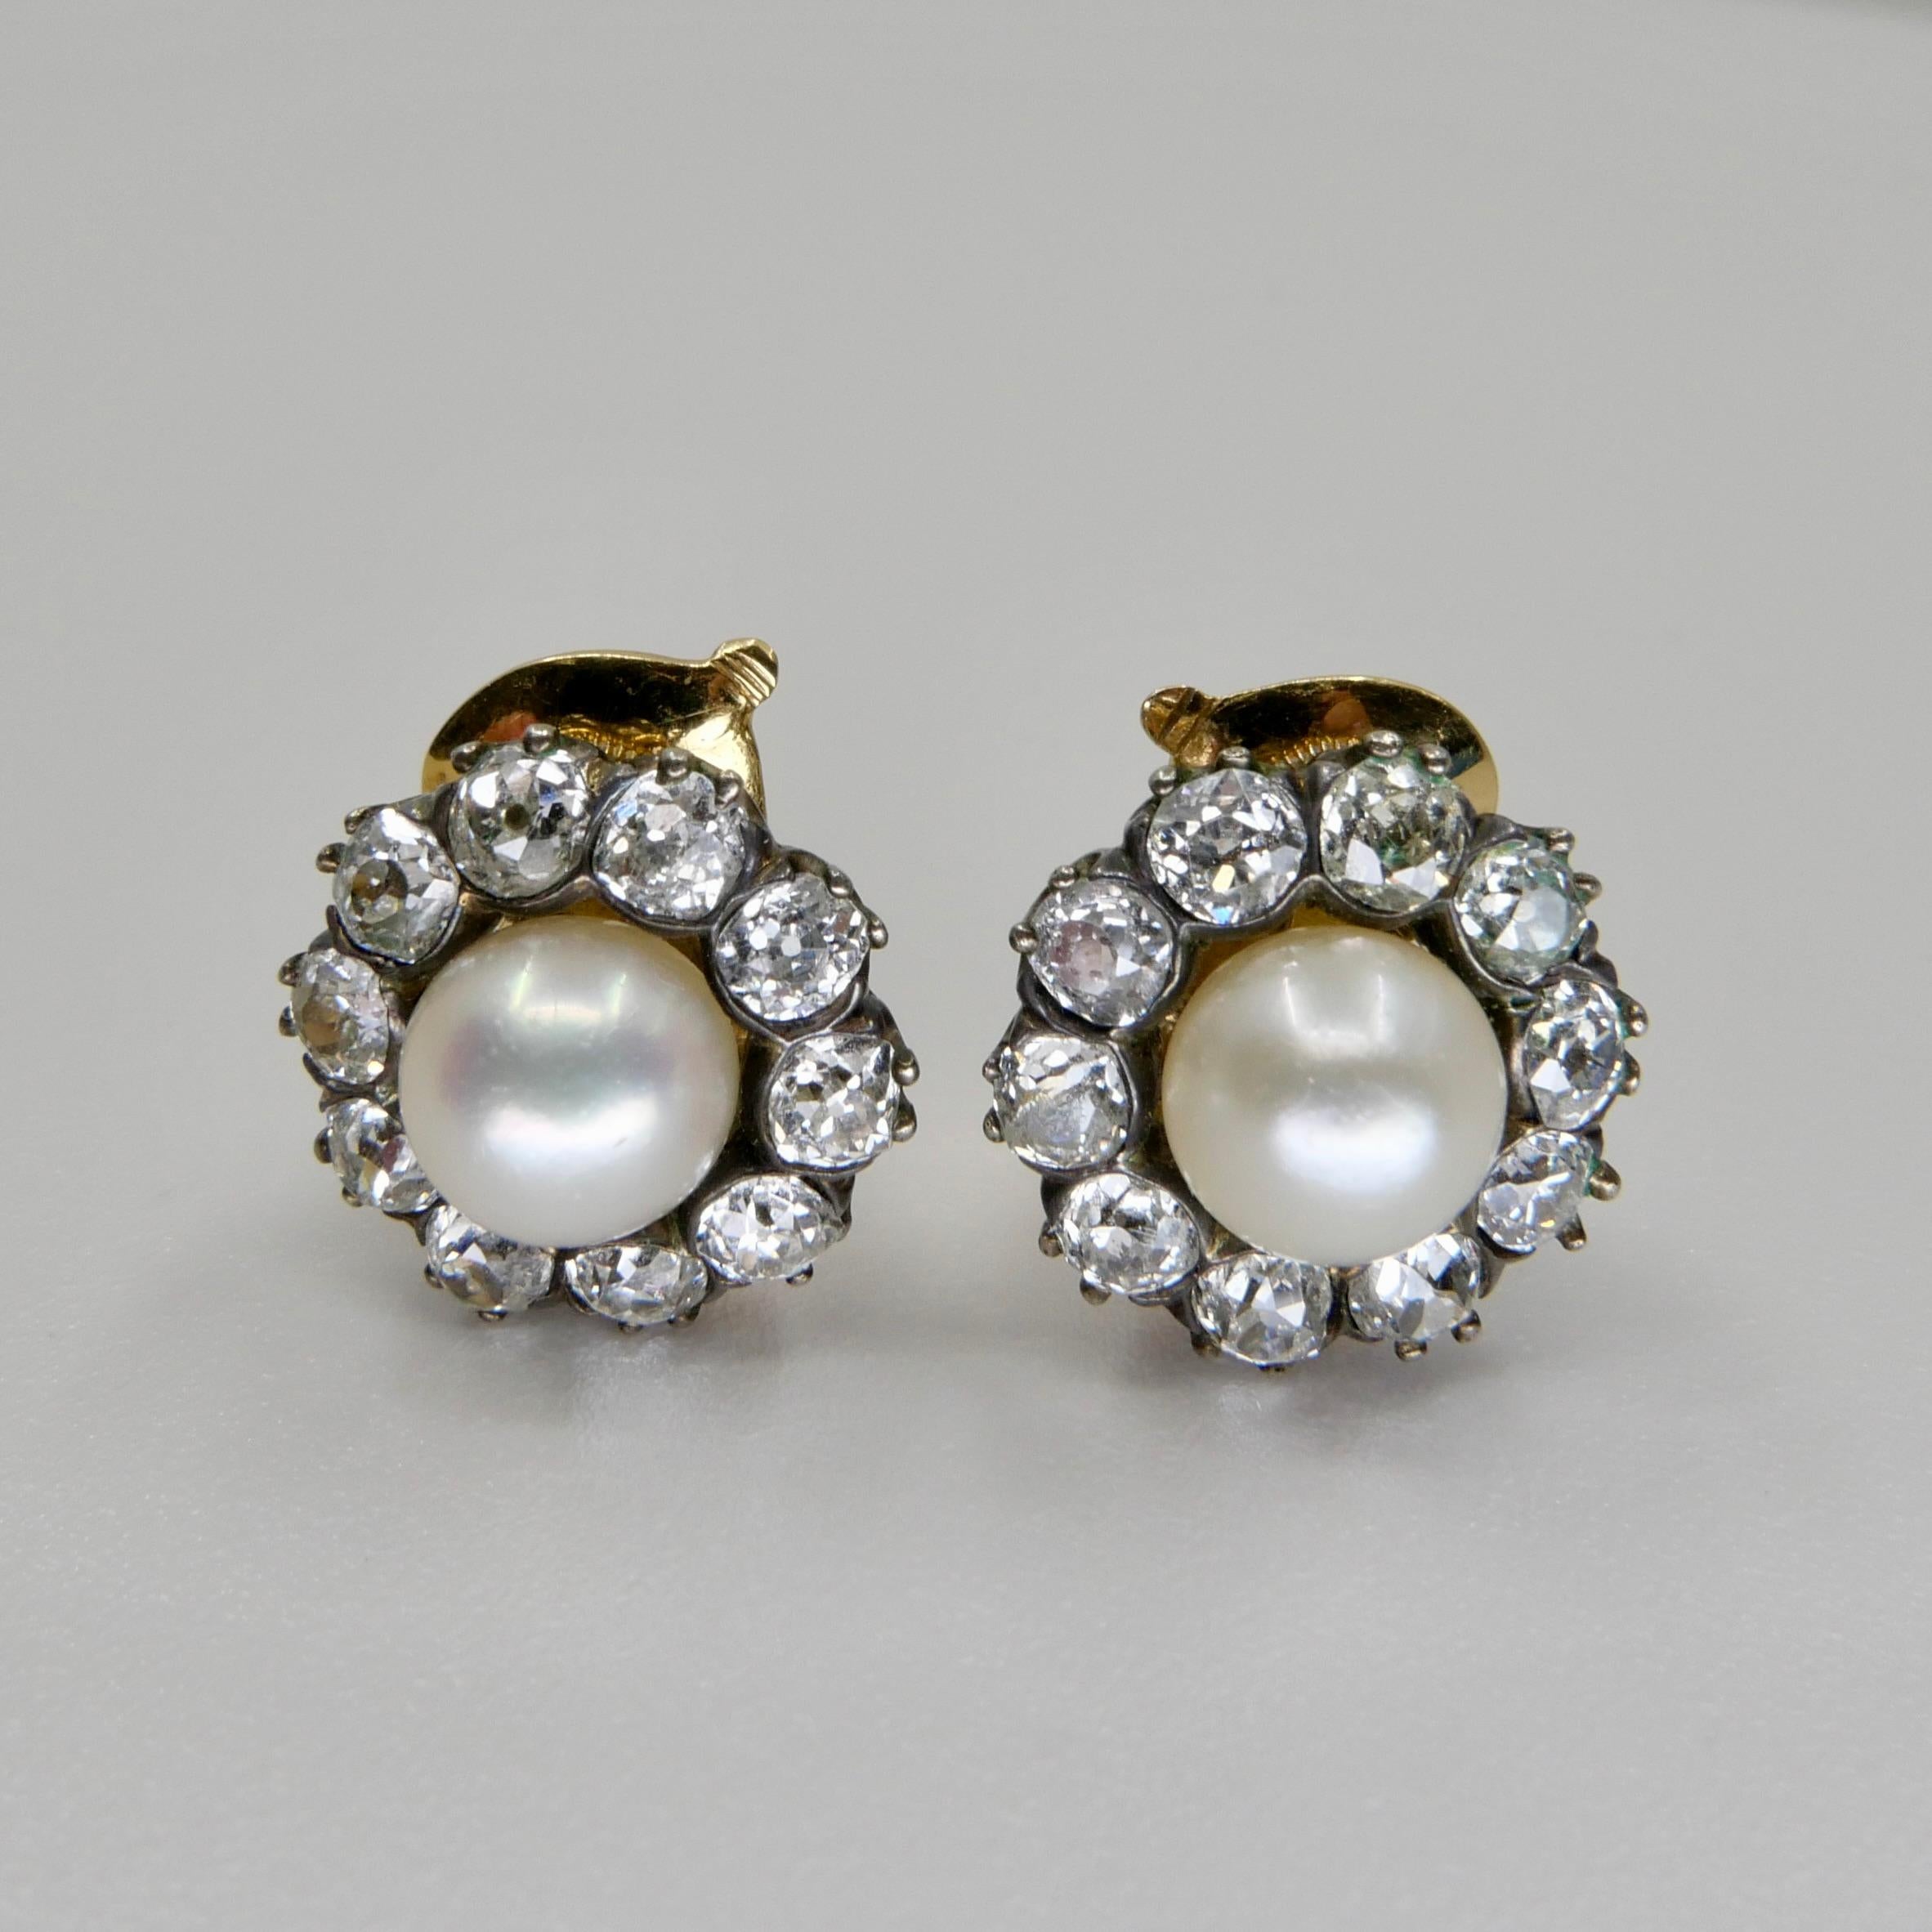 Antique Natural Pearl & Old Cut Diamond Earrings. French Assay & Maker Mark. 5